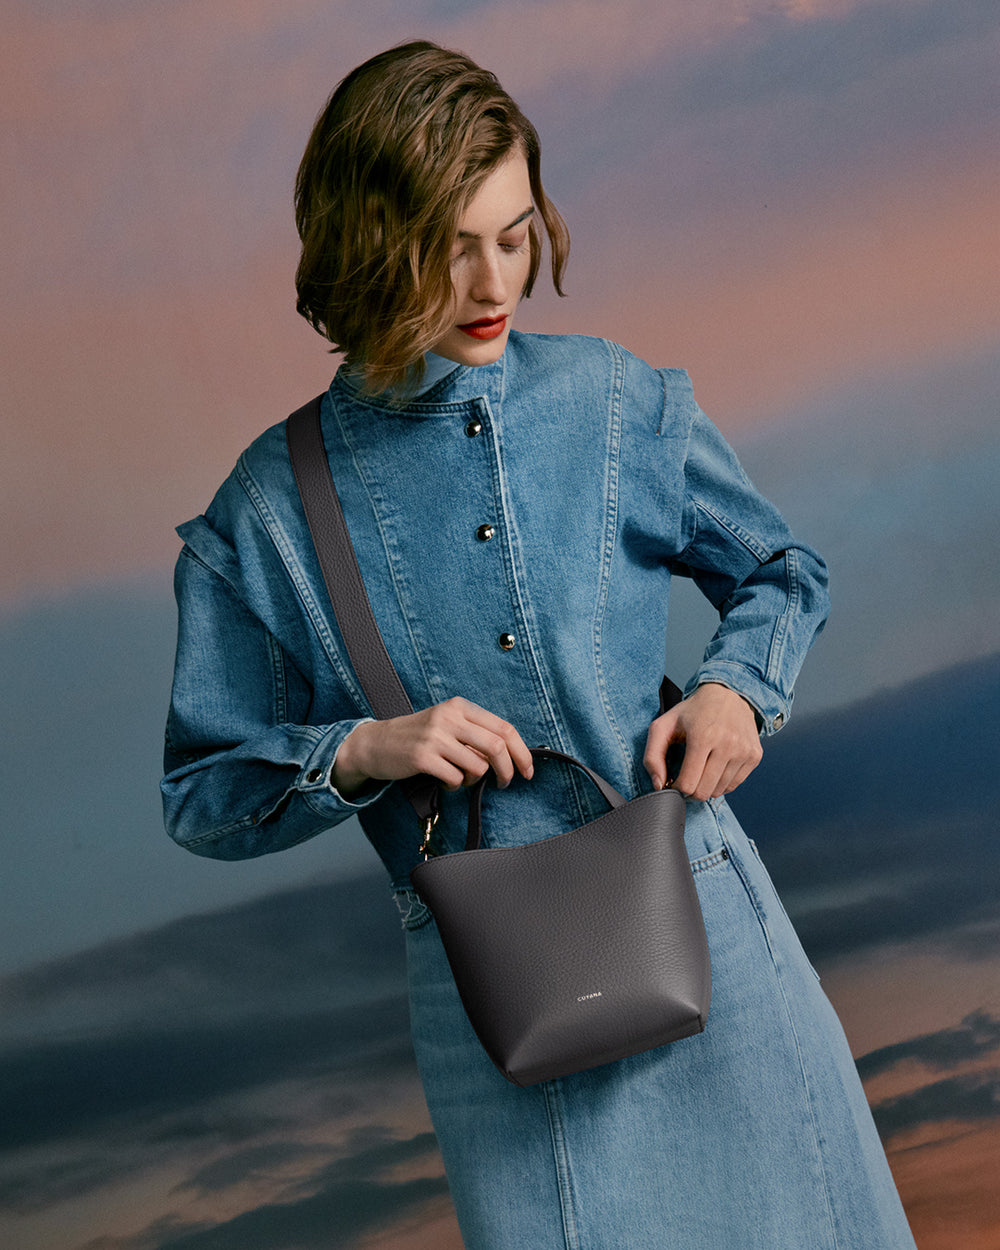 Woman in a denim outfit holding a handbag, standing against a sky background.